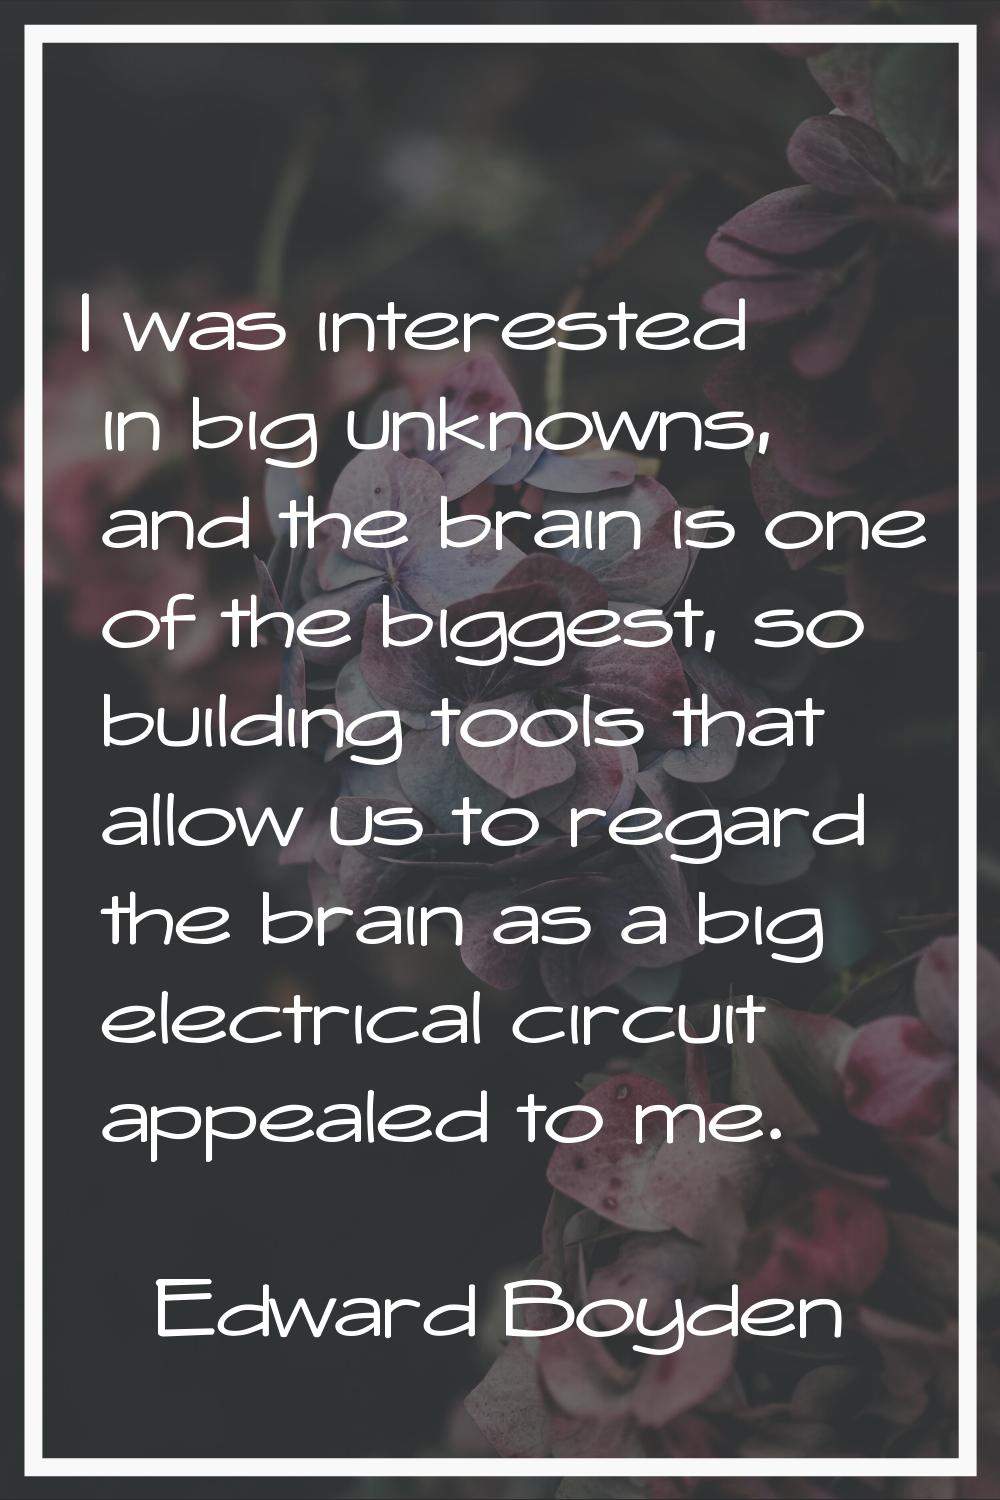 I was interested in big unknowns, and the brain is one of the biggest, so building tools that allow